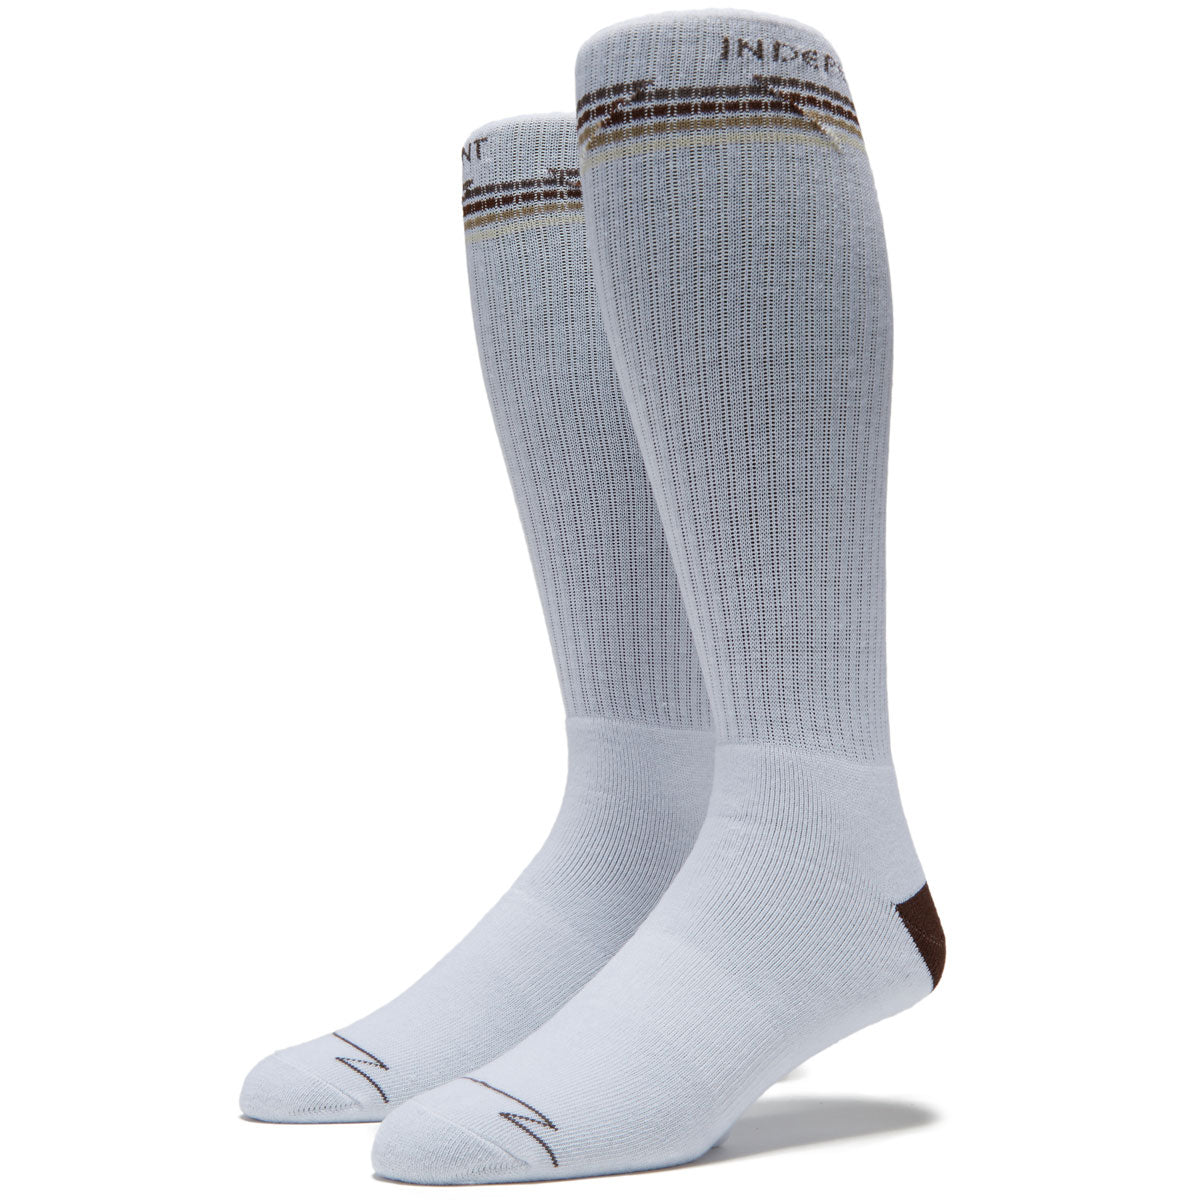 Independent Wired Mid Socks - White image 1